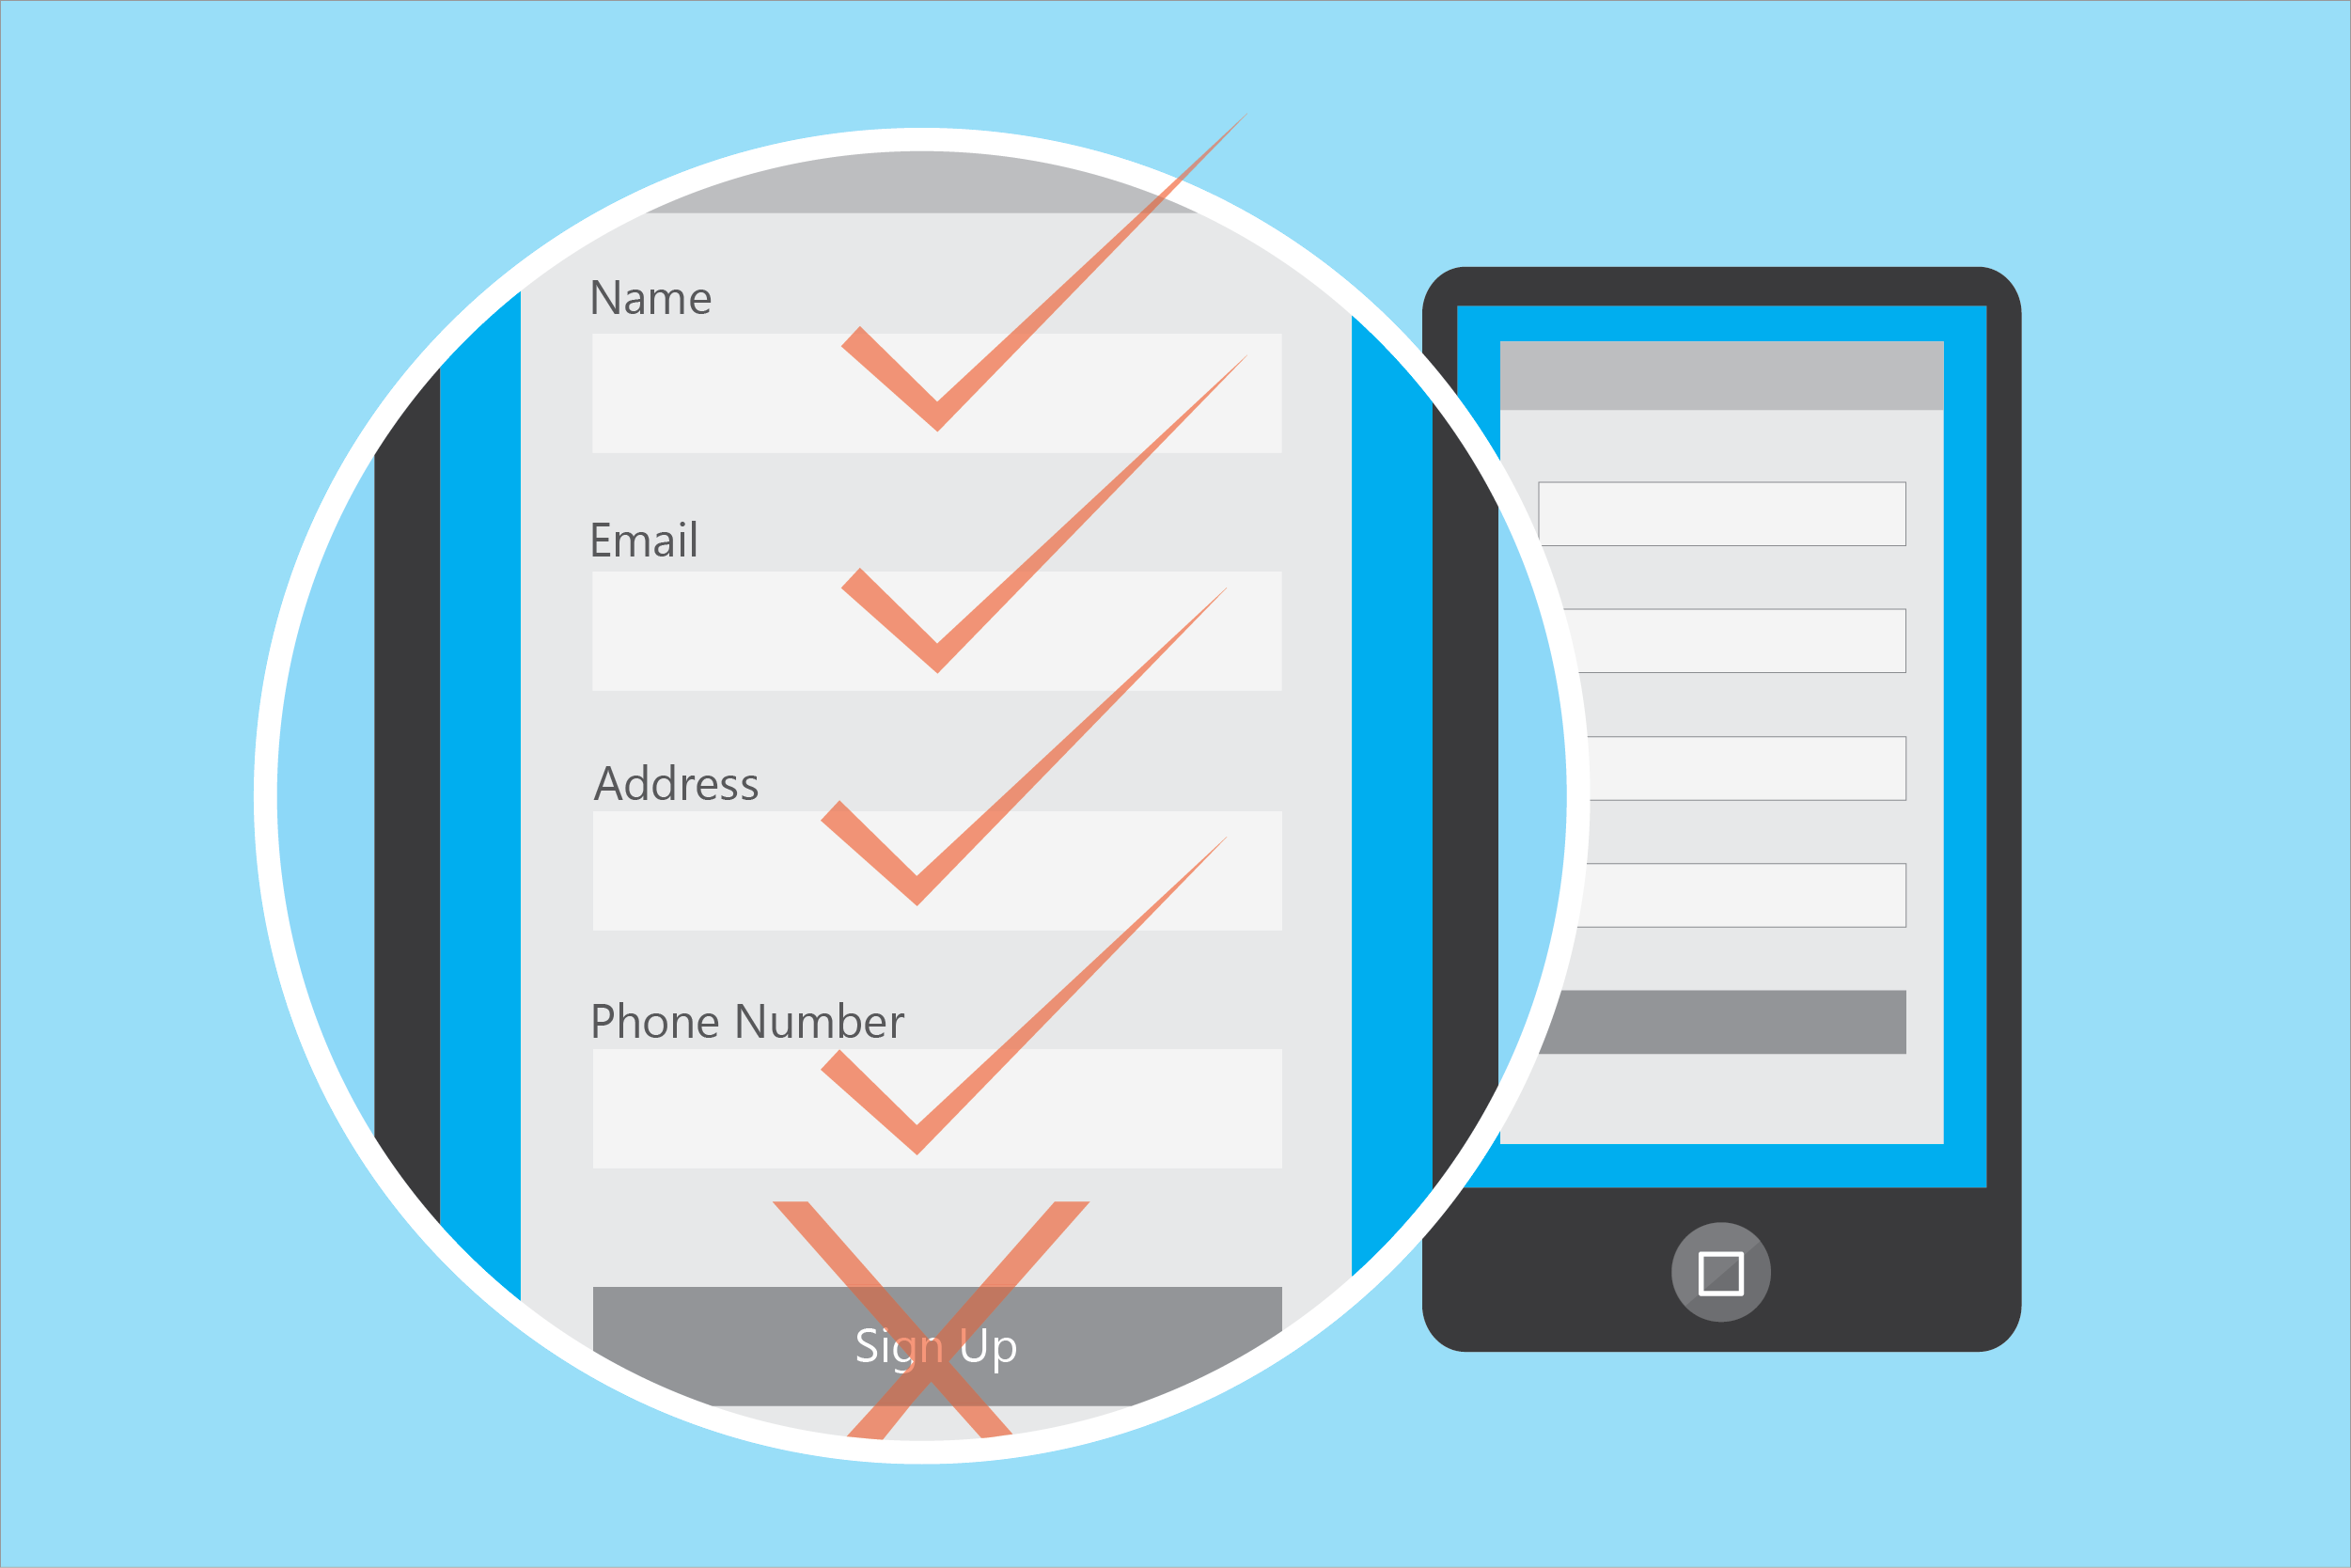 10 Methods for Optimizing Your Forms for Mobile